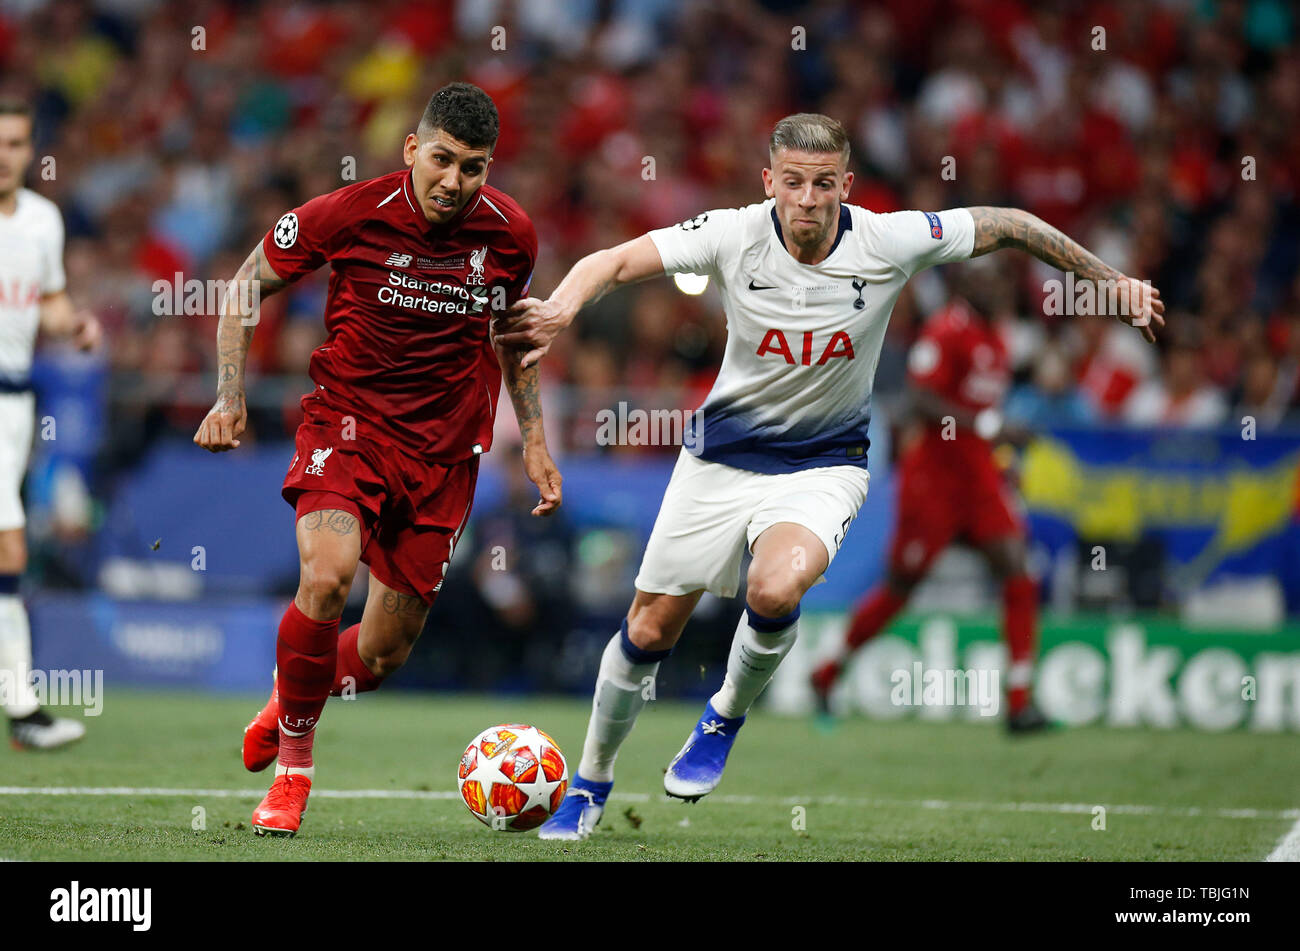 Madrid, Spain. 01st June, 2019. Liverpool's FC Roberto Firmino and Tottenham Hotspur FC's Toby Alderweireld competes for the ball during the Final Round of the UEFA Champions League match between Tottenham Hotspur FC and Liverpool FC at Wanda Metropolitano Stadium in Madrid. Final Score: Tottenham Hotspur FC 0 - 2 Liverpool FC. Credit: SOPA Images Limited/Alamy Live News Stock Photo